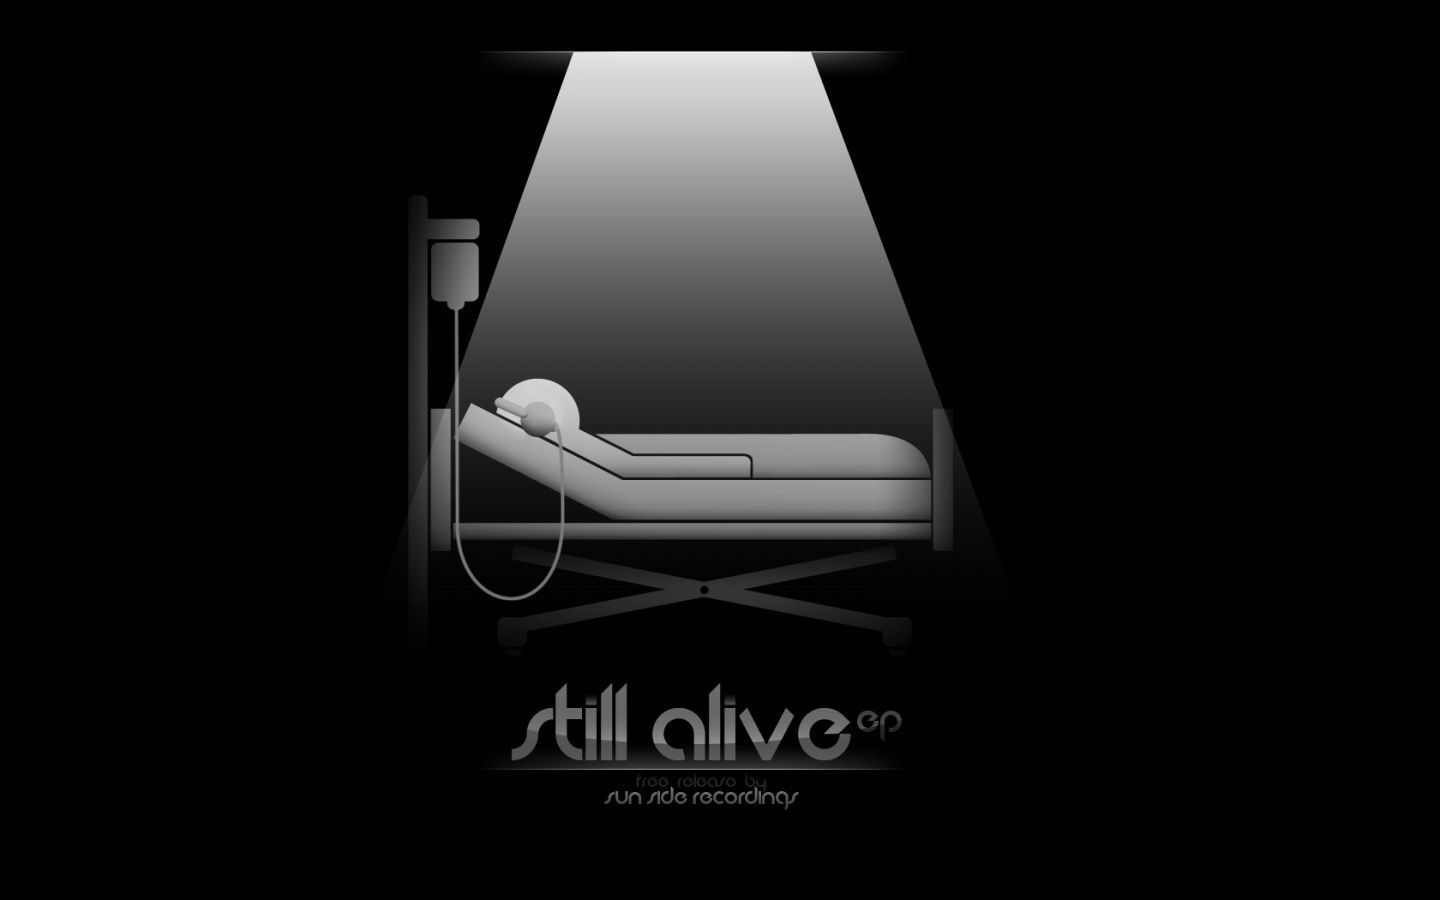 1440x900 Still Alive wallpaper, music and dance wallpapers